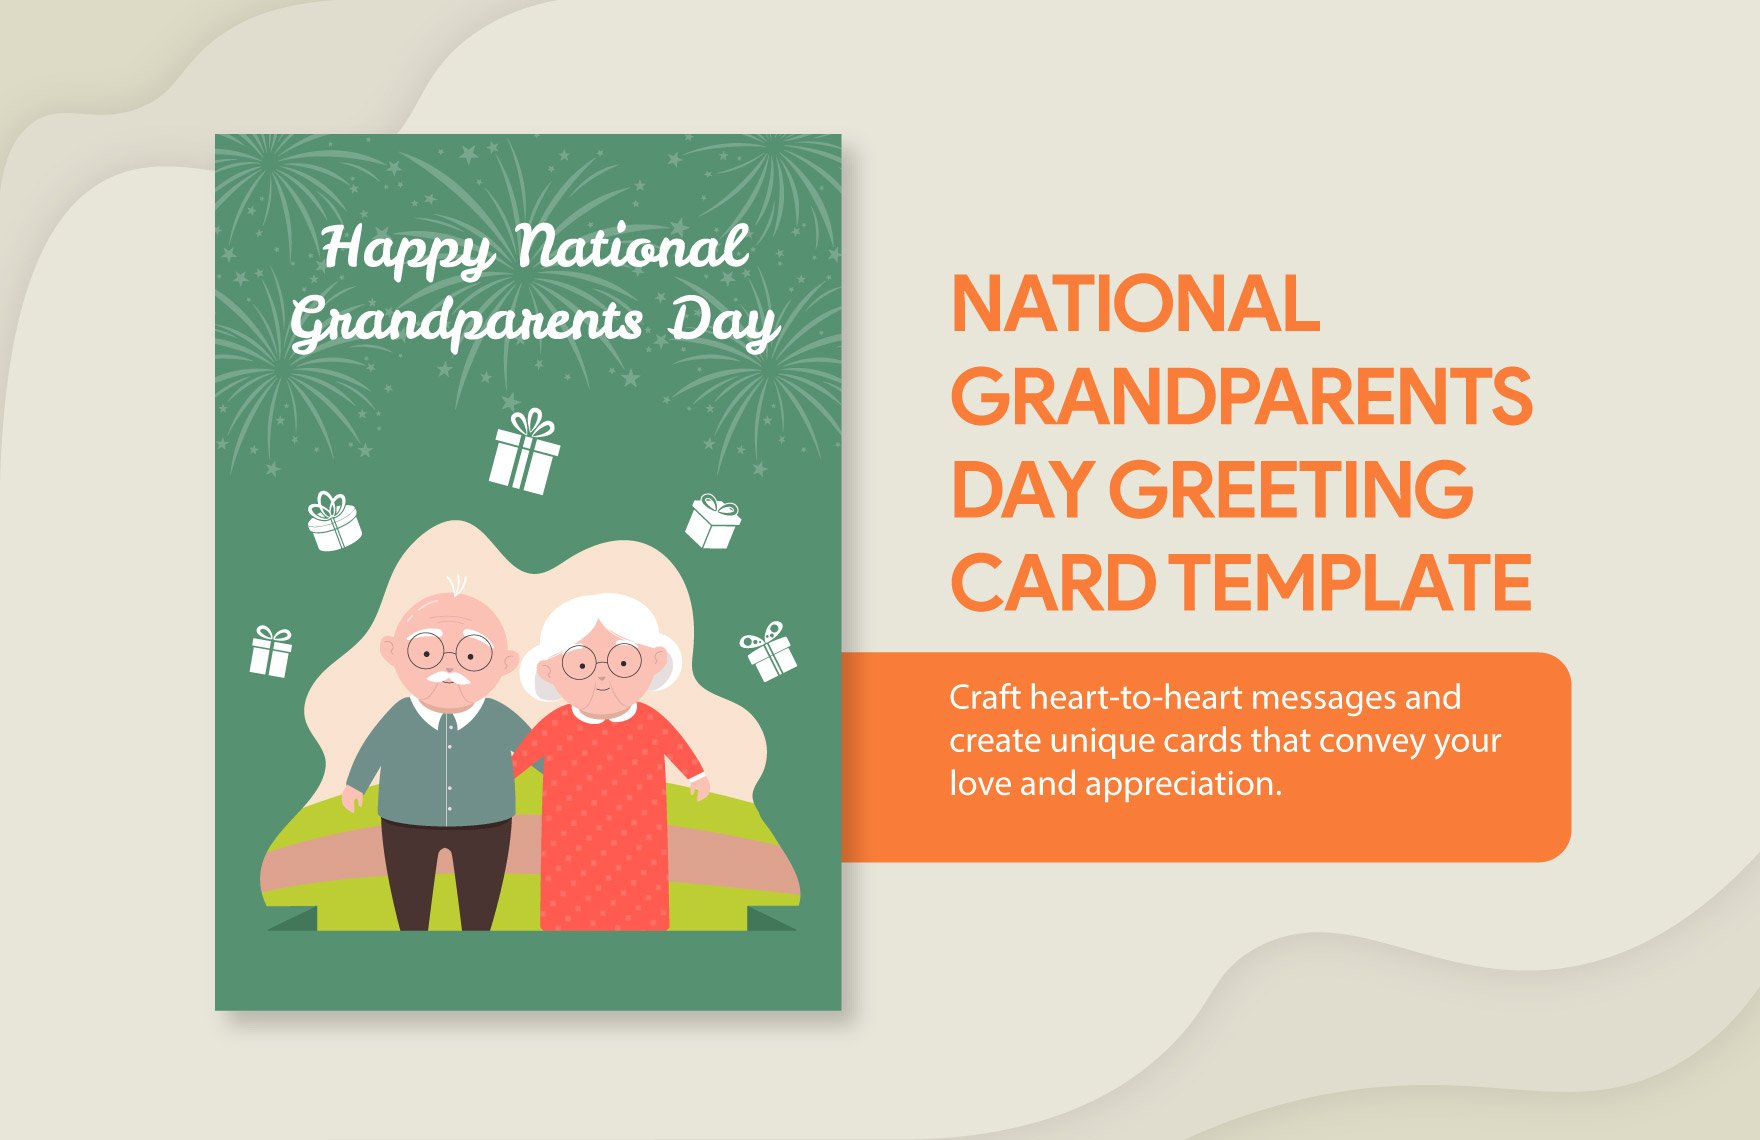 National Grandparents Day Greeting Card Template